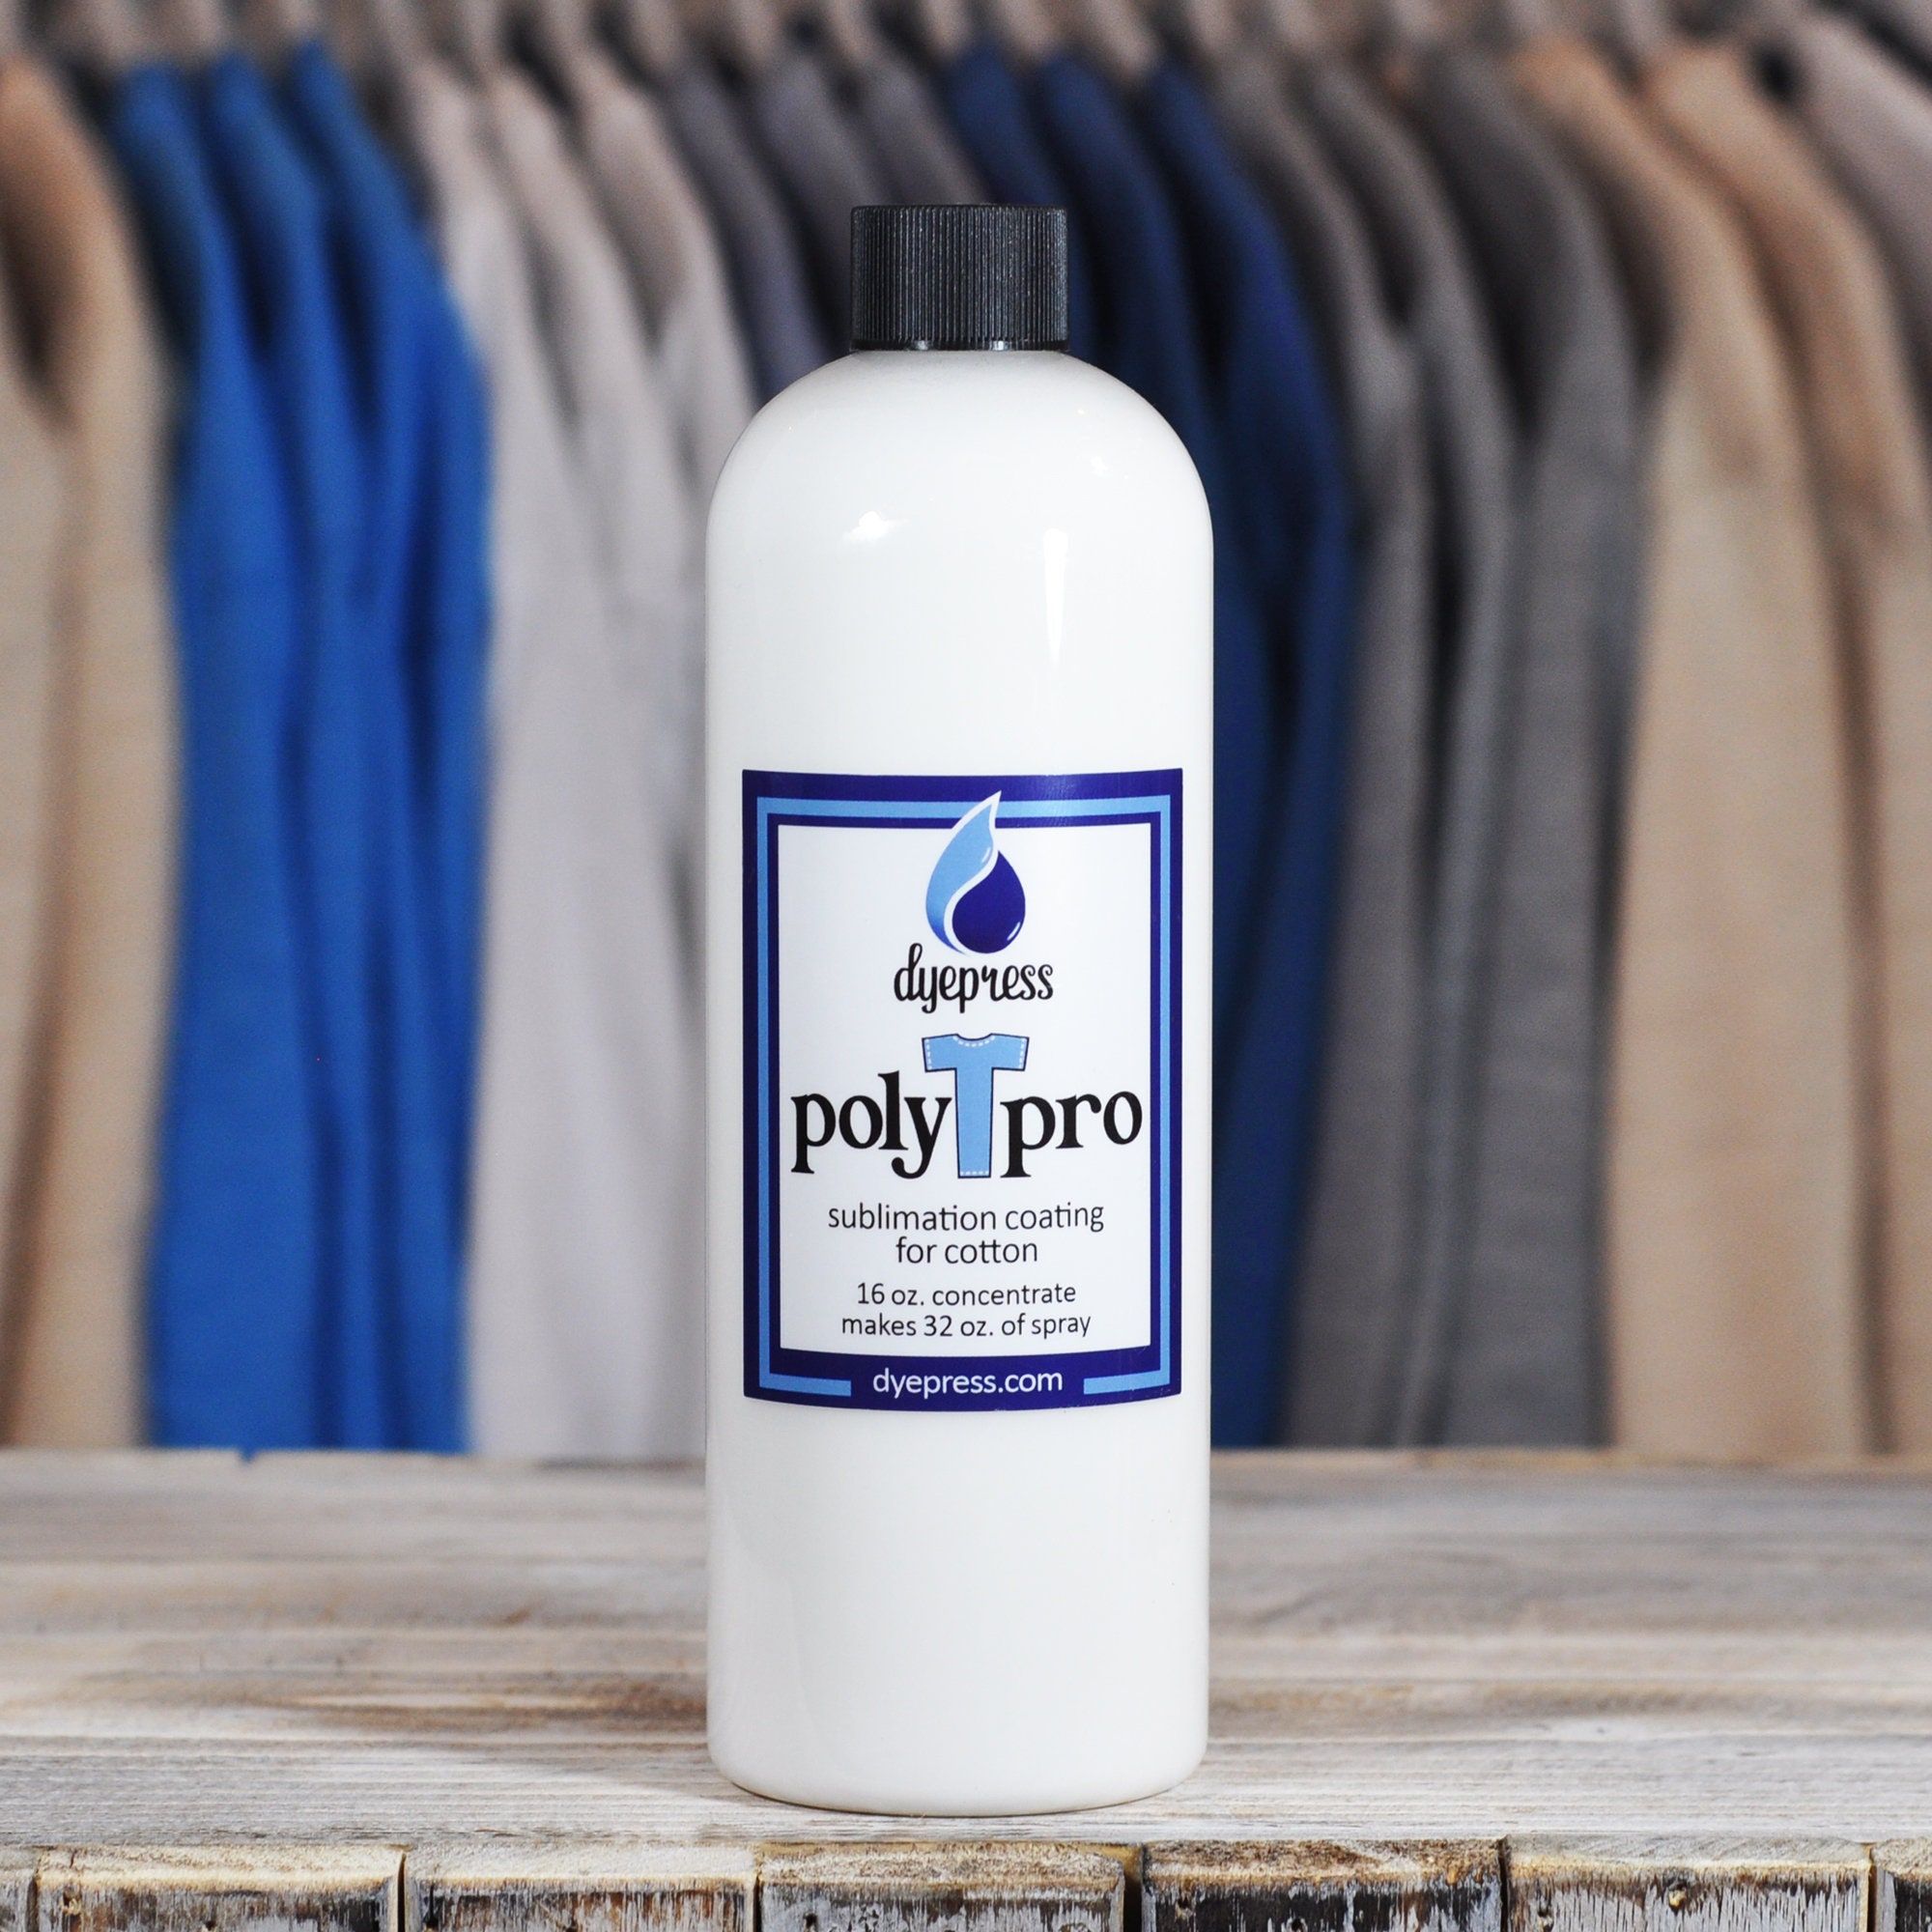 Dyepress Polytpro Poly Spray Sublimation Coating for 100% Cotton and Cotton  Blends 